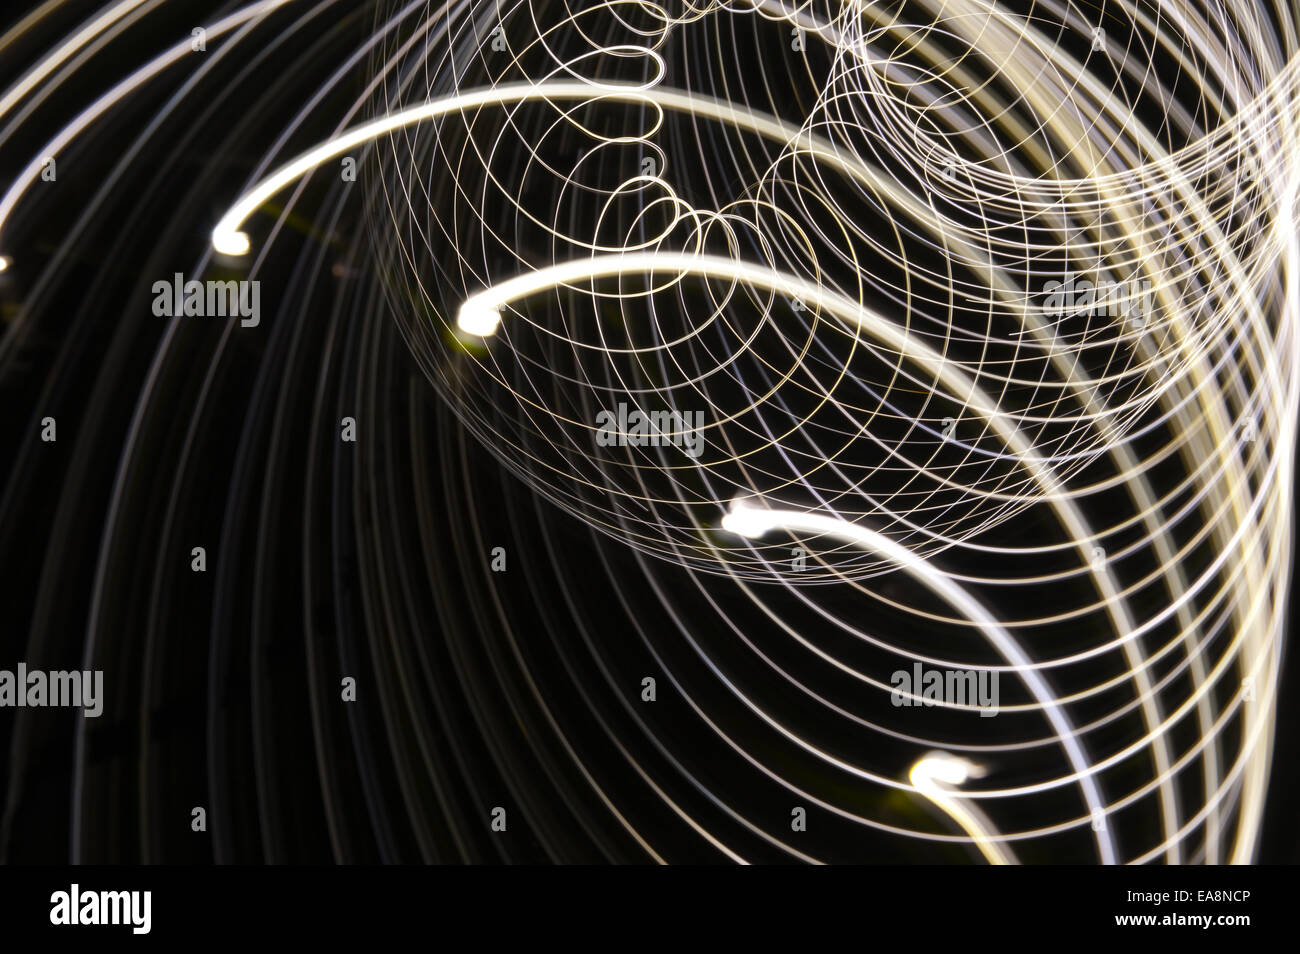 swirling spinning motion and trails traces of moving lights creating patterns vortice Stock Photo